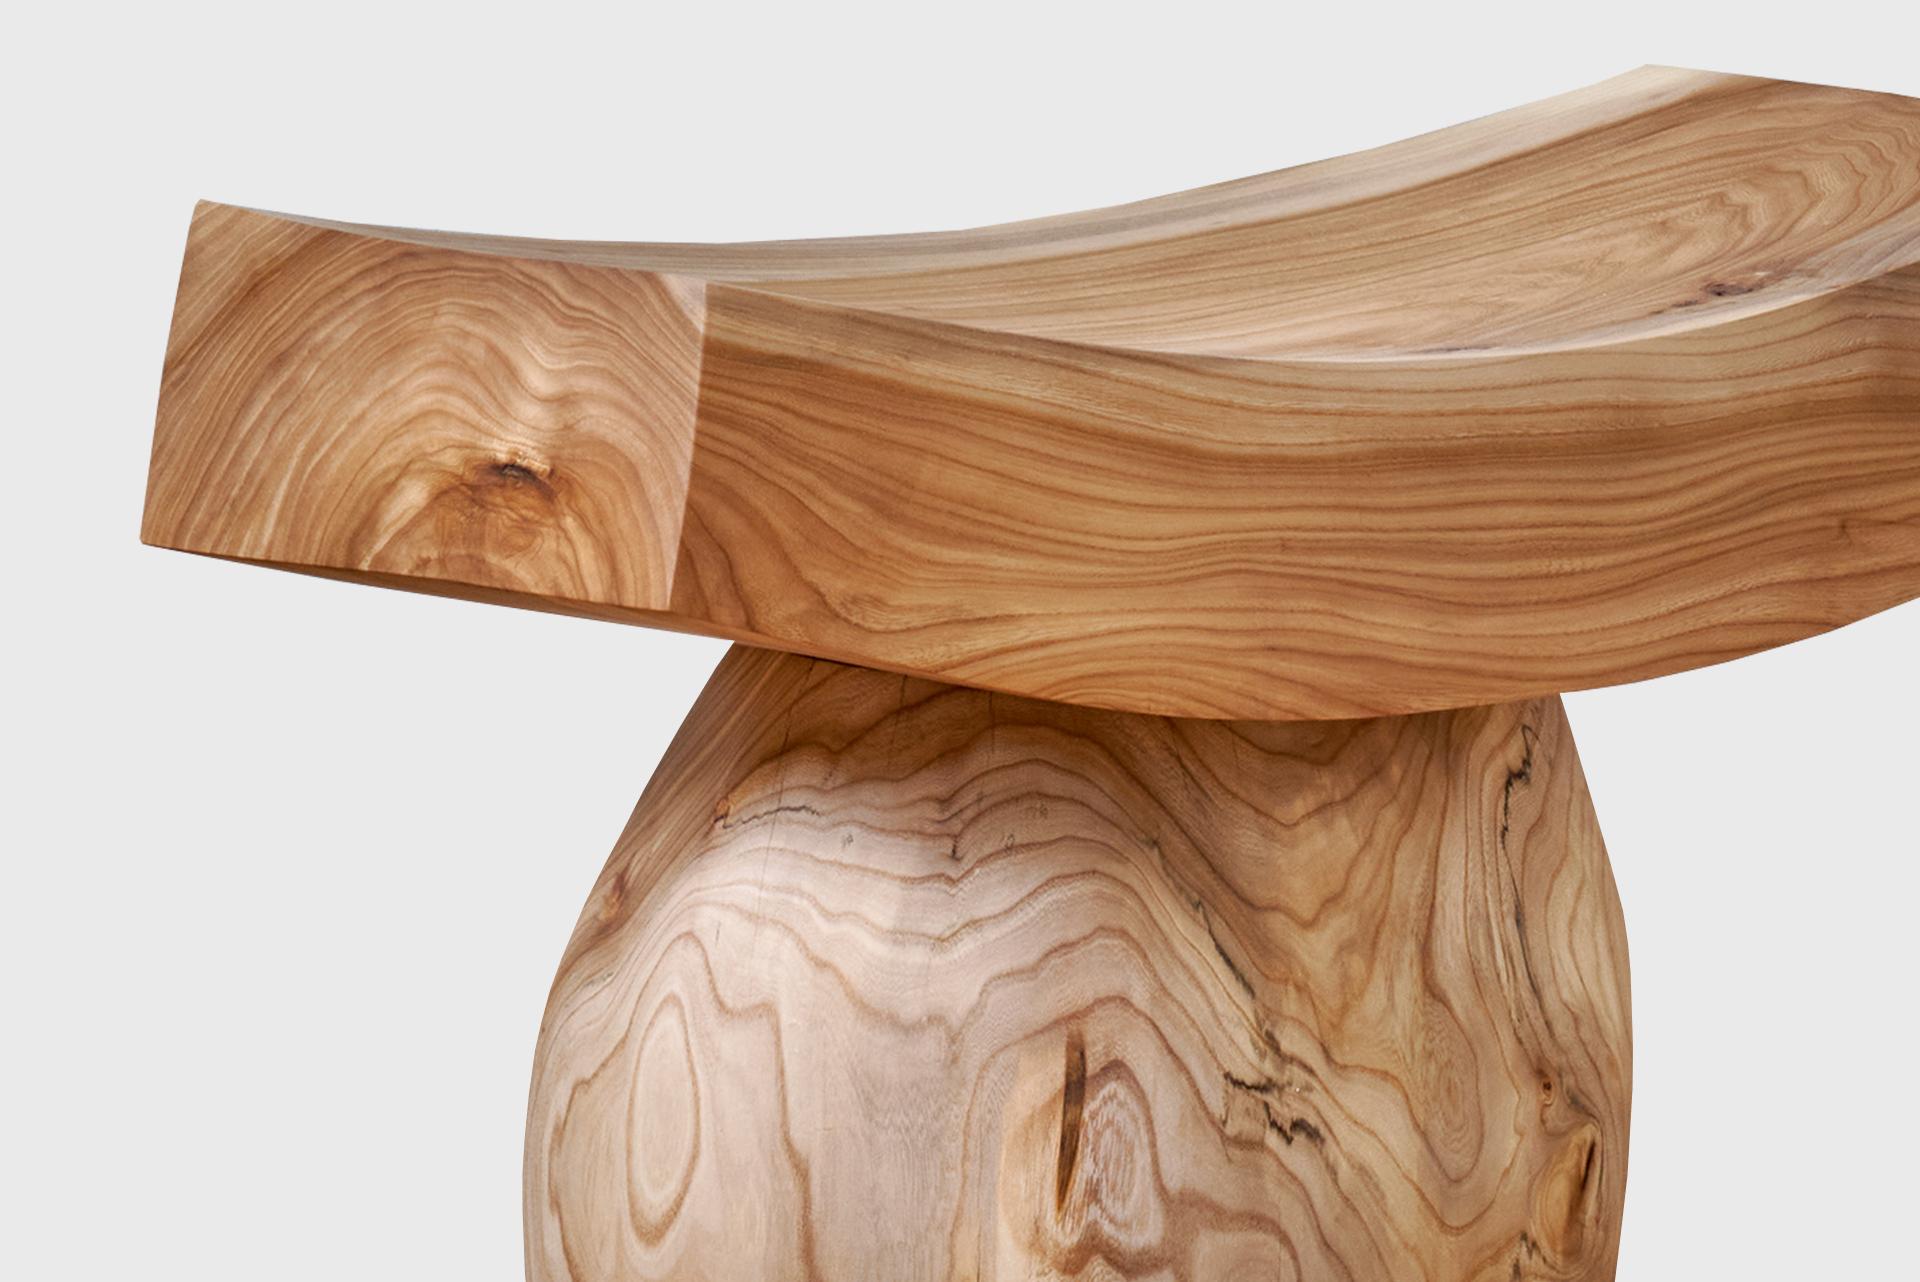 Lounge Stool.
Manufactured by Jonas Lutz.
Exclusively for SIDE.
Netherlands, 2023.
Natural Elm wood.

Measurements
67 x 32 x 40h cm
26,4 x 12,6 x 35,4h in

Provenance
Rotterdam, Netherlands.

Exhibitions
Casavells 2023.

Concept
For